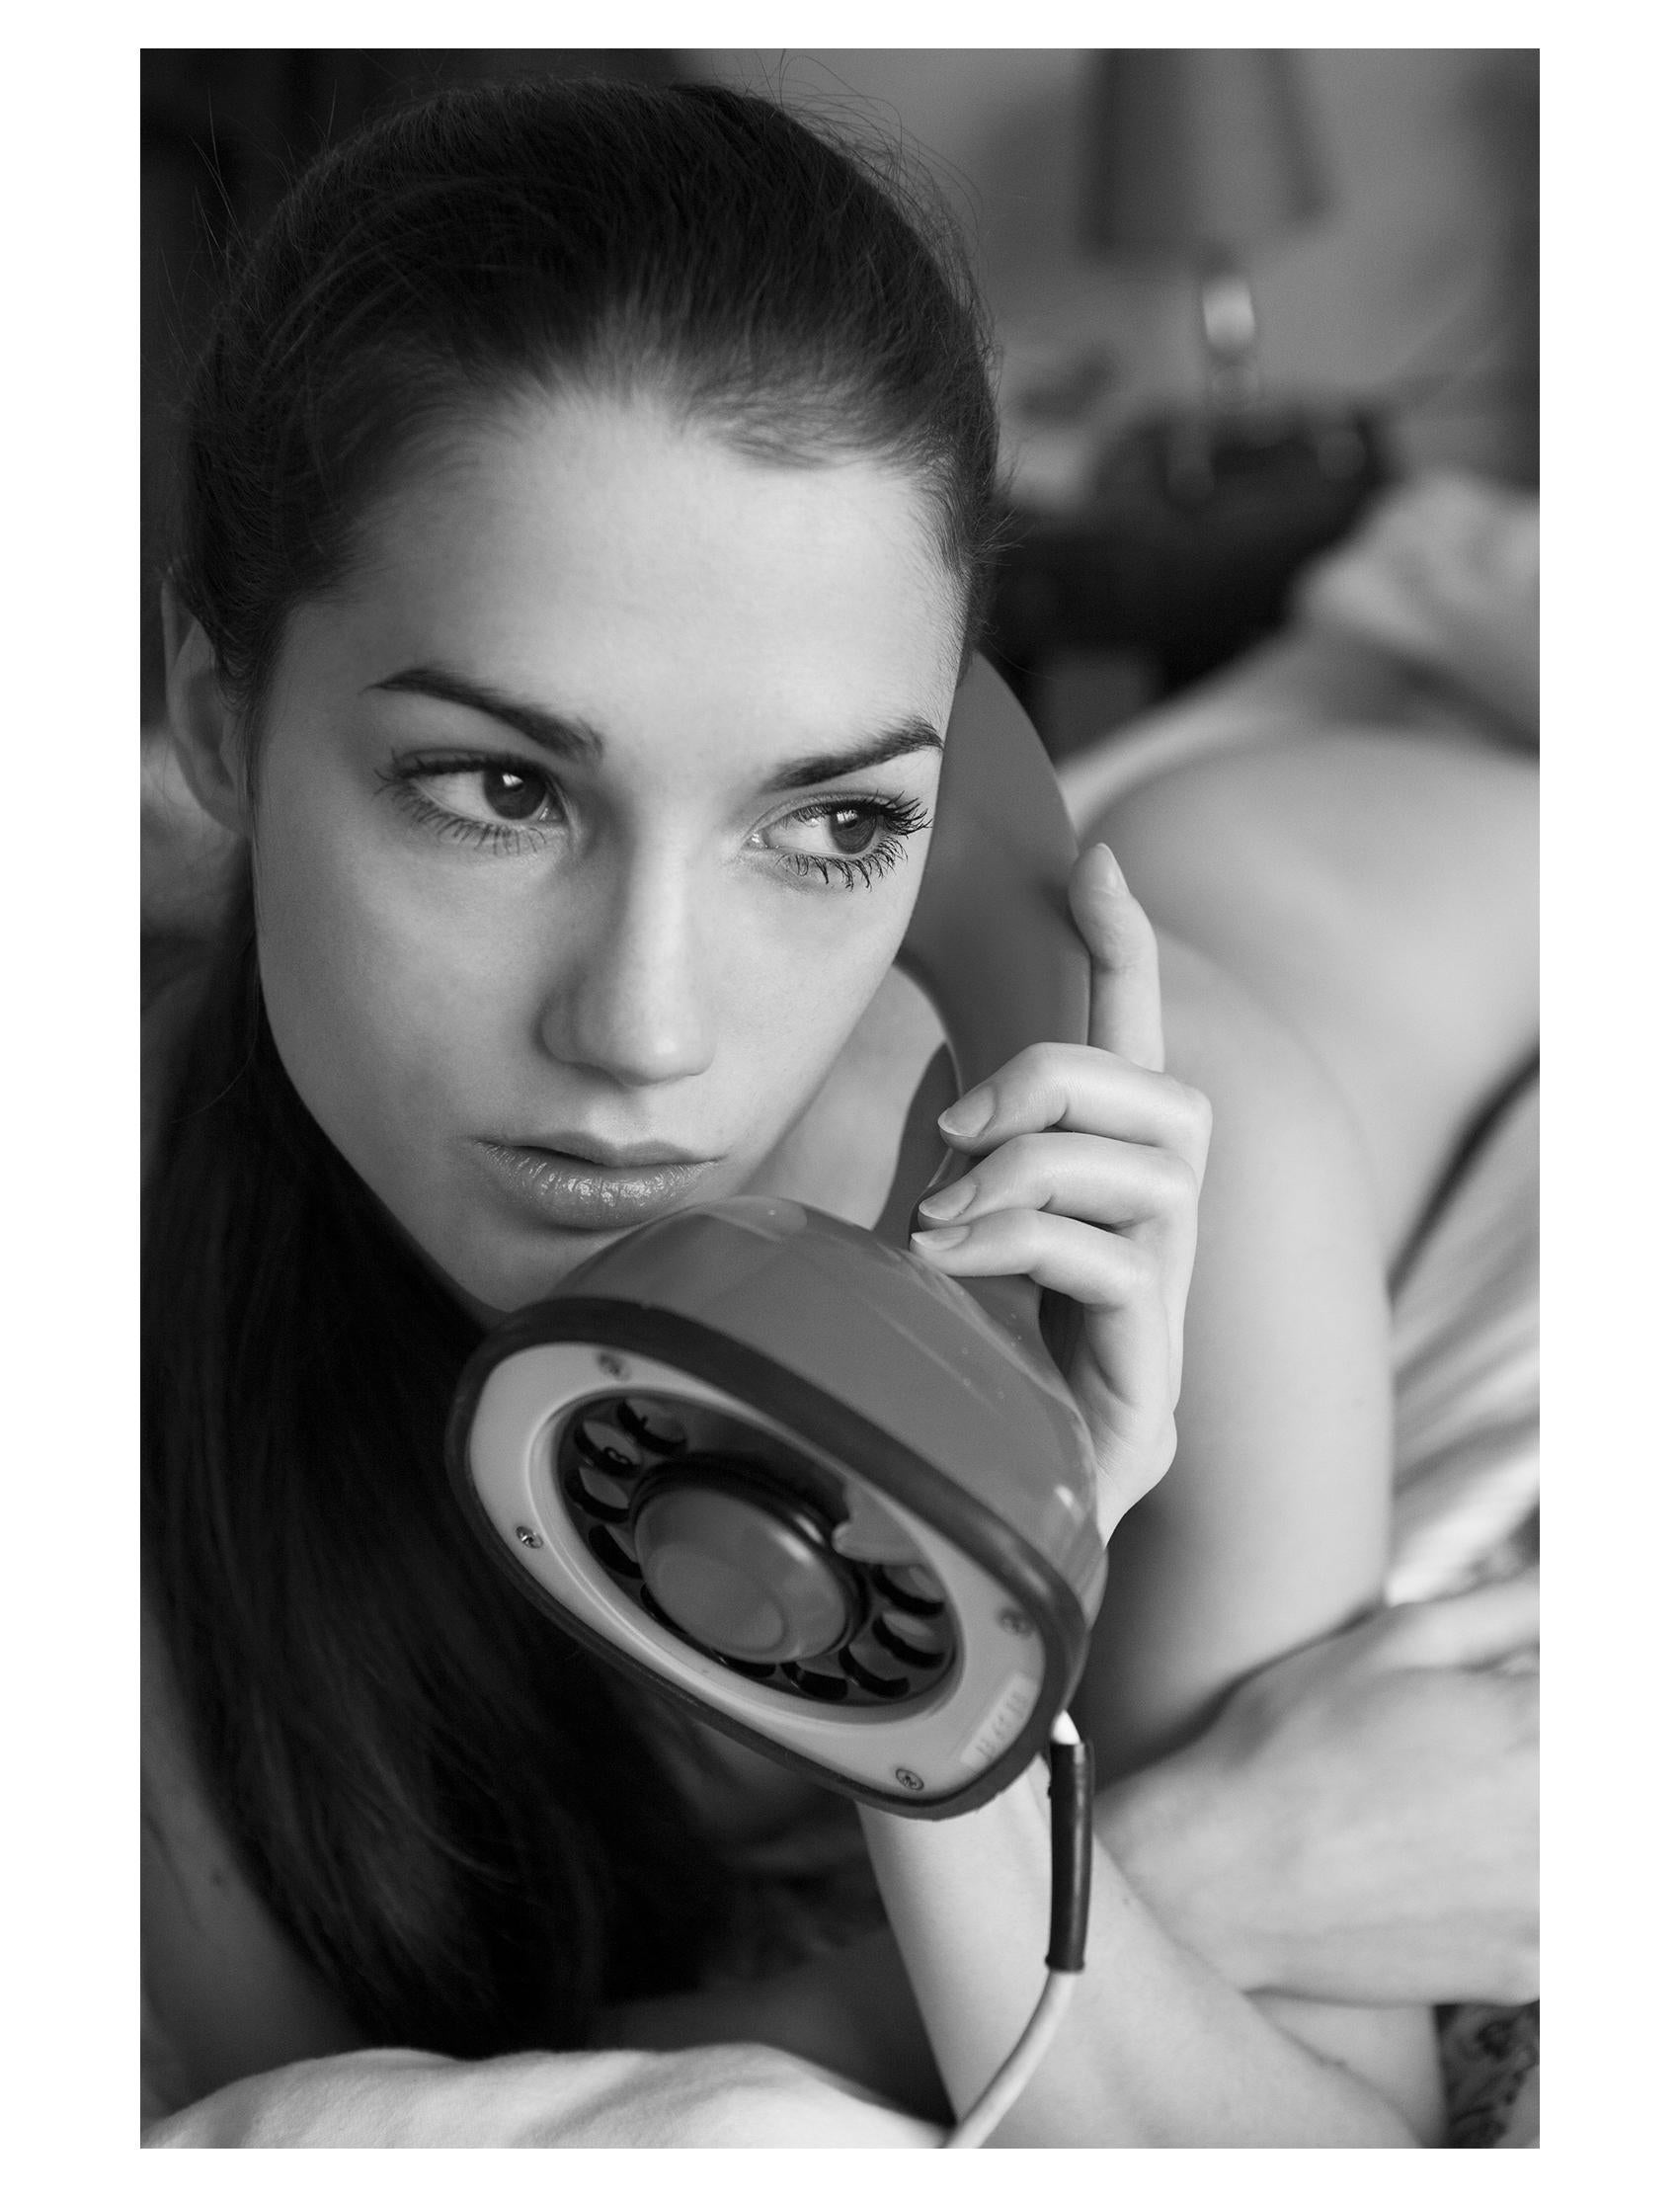 Old phone 2013 - Black Nude Photograph by ALAIN DAUSSIN 